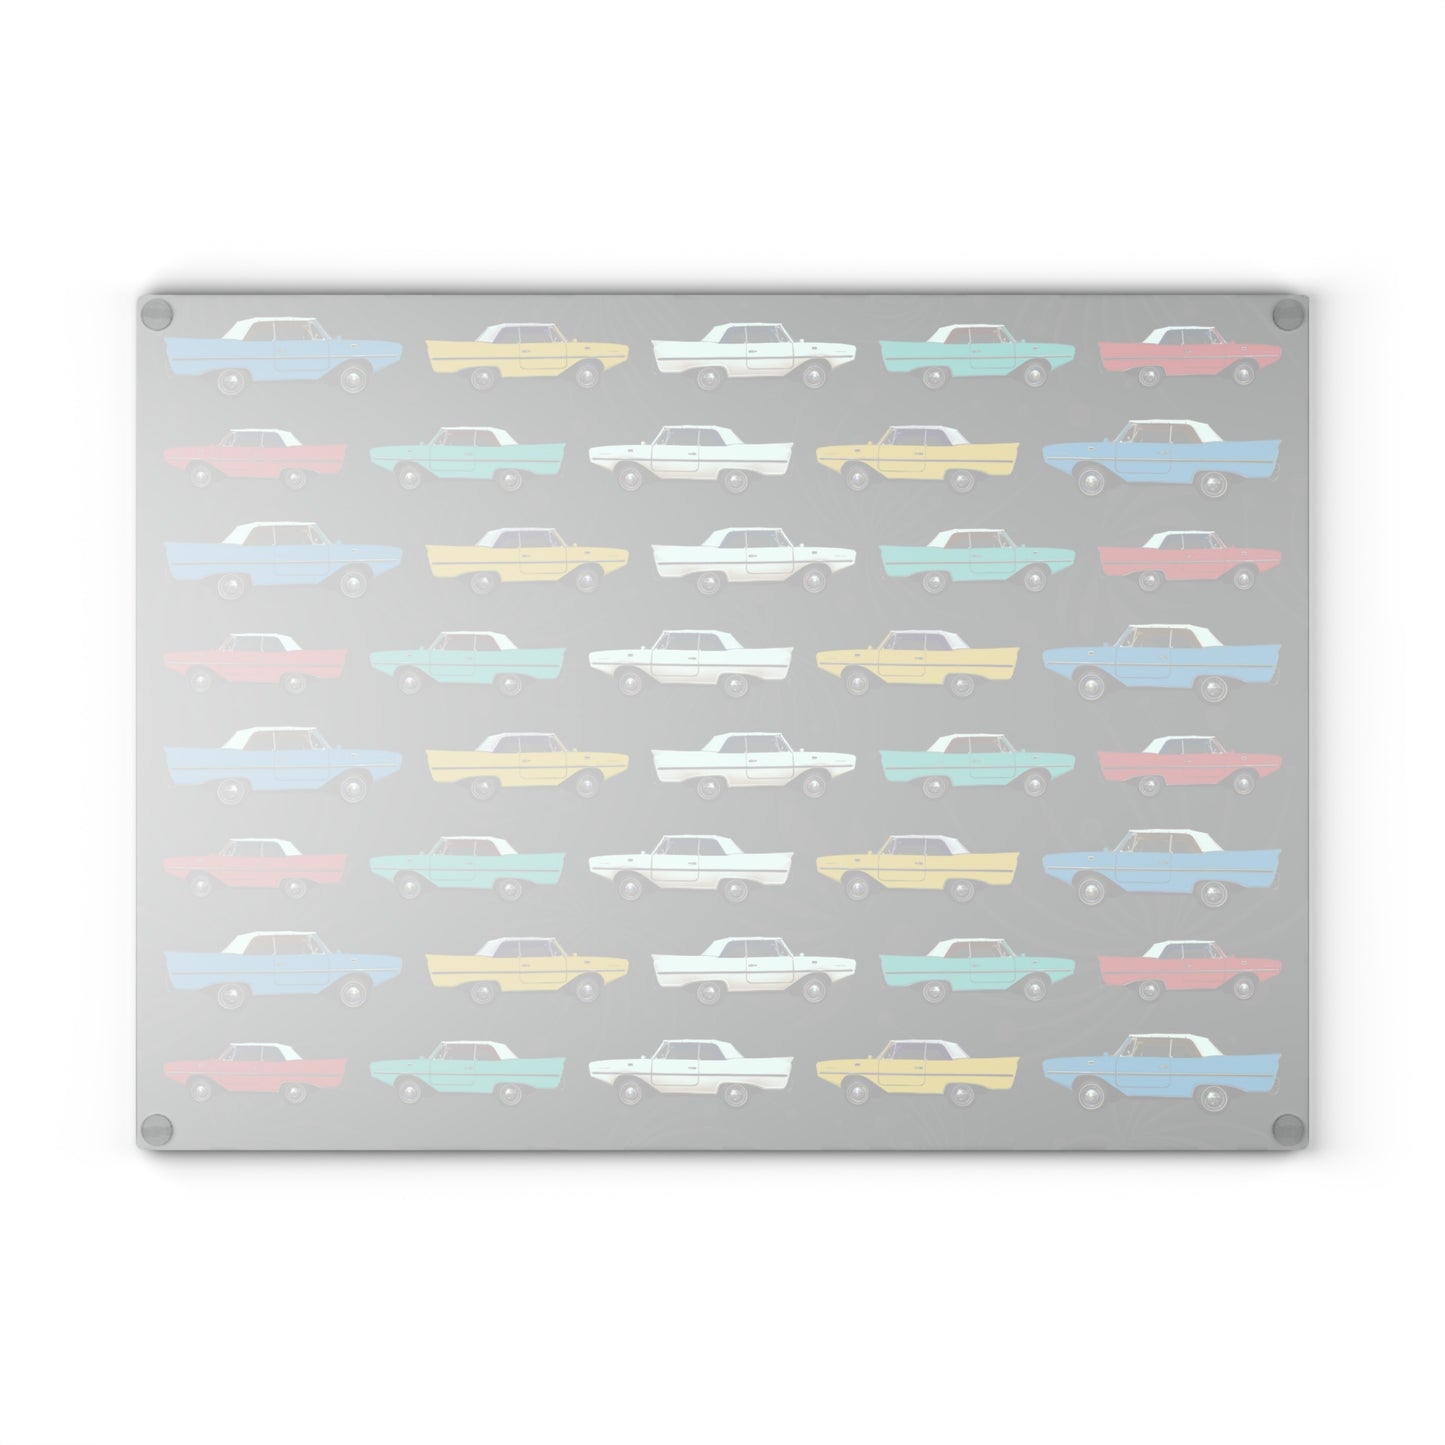 Amphicar 770 Glass Cutting Board for Swim-Ins and Car Show Barbeques or Trailers - 2 Sizes